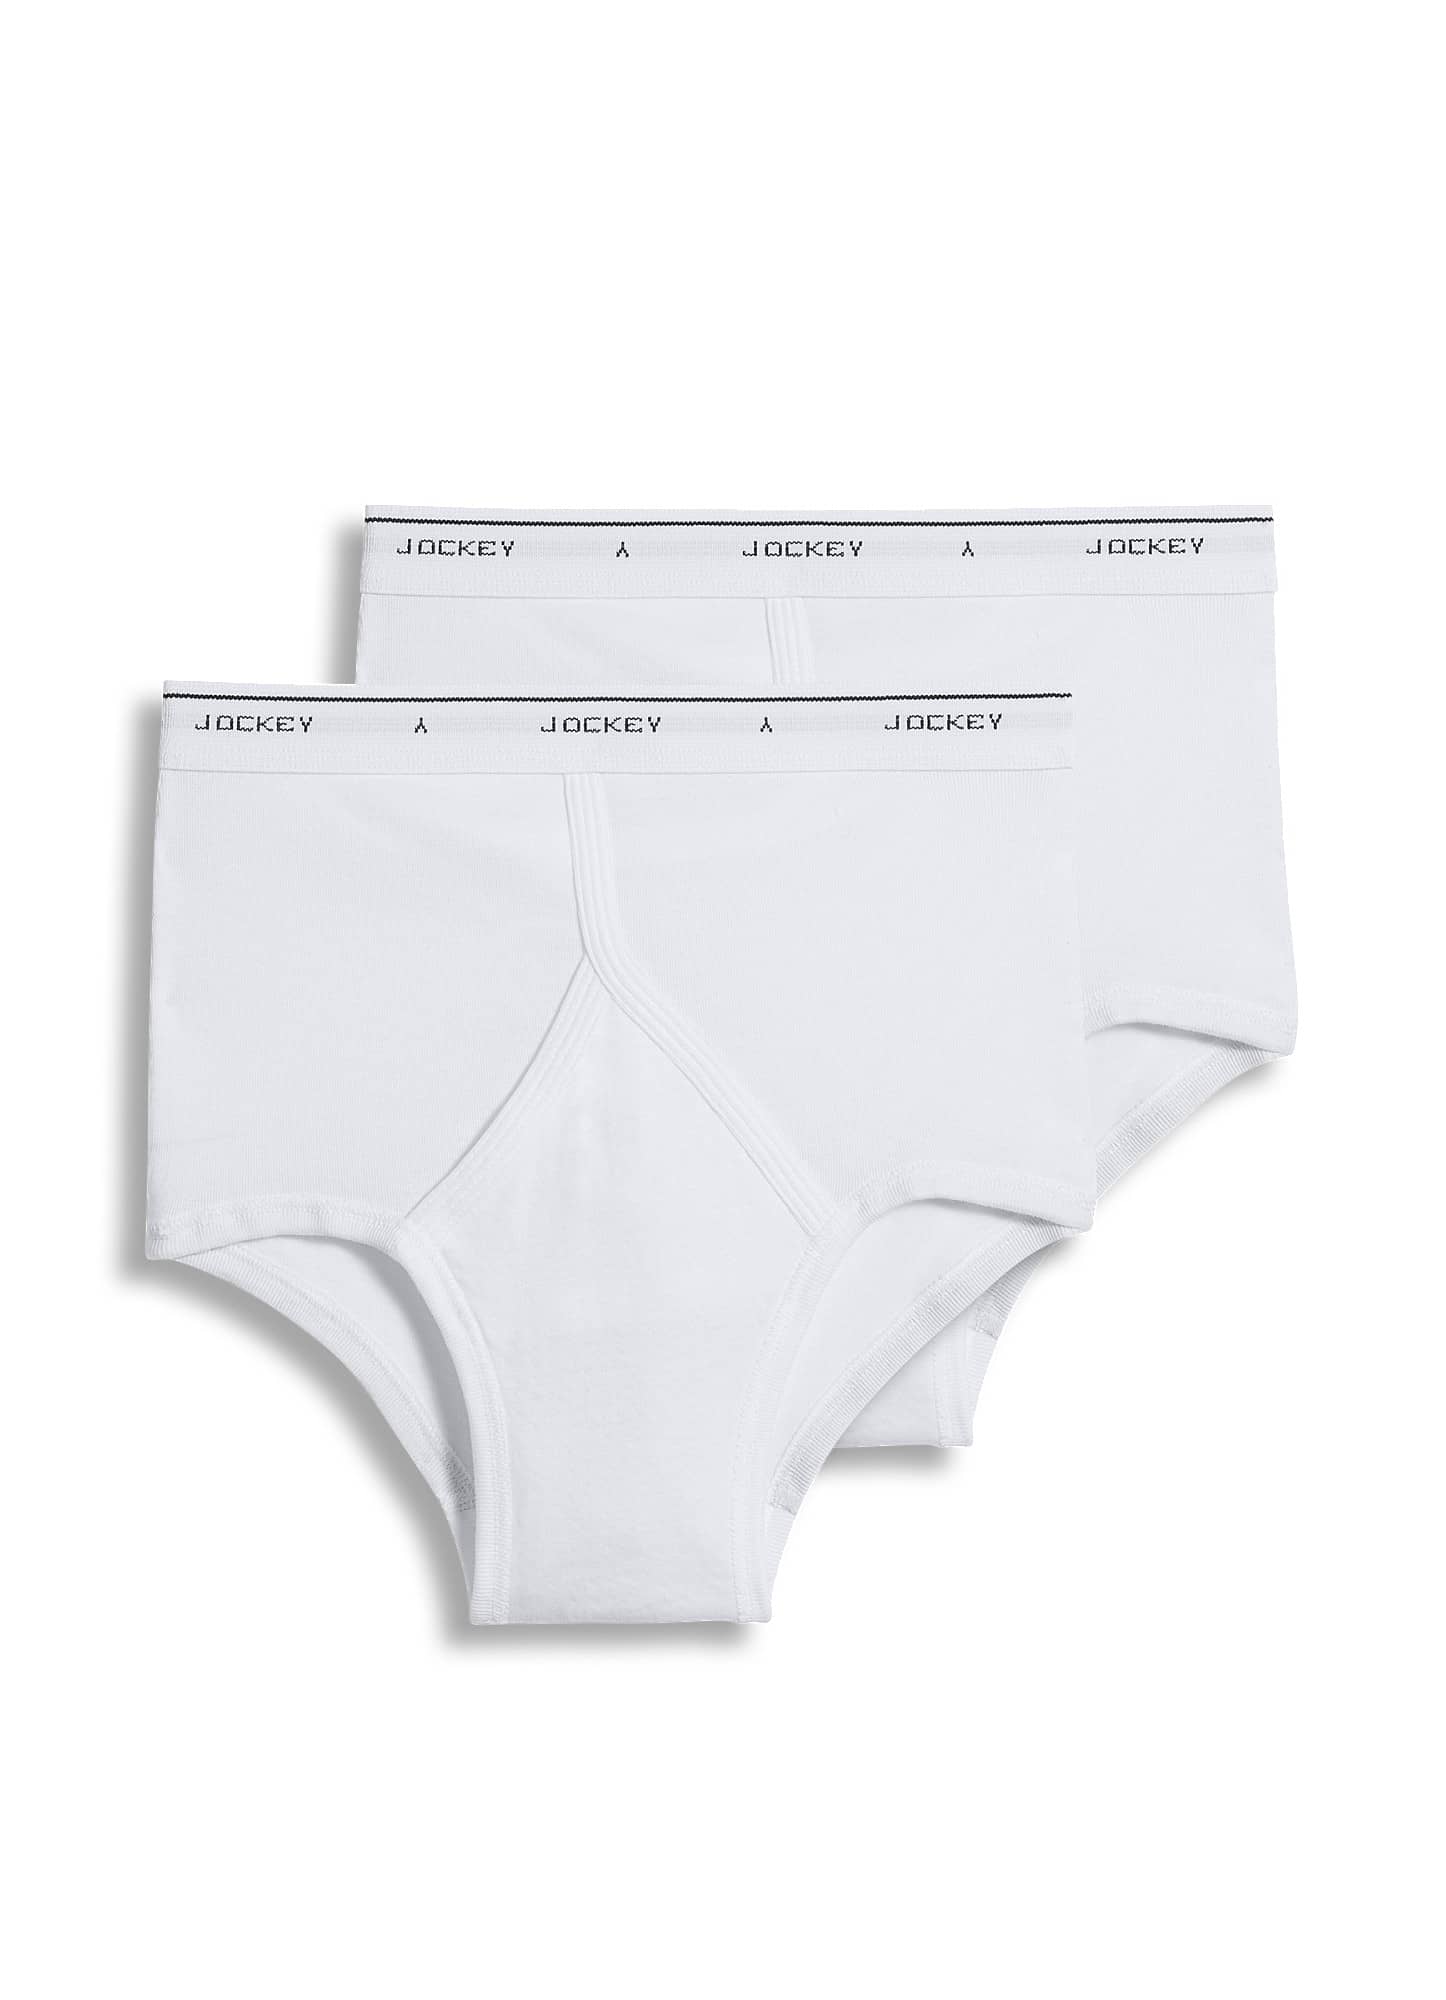 2 Pair Jockey Mens Y - Front Fly Briefs 56 Big Men White Cotton 5x for ...